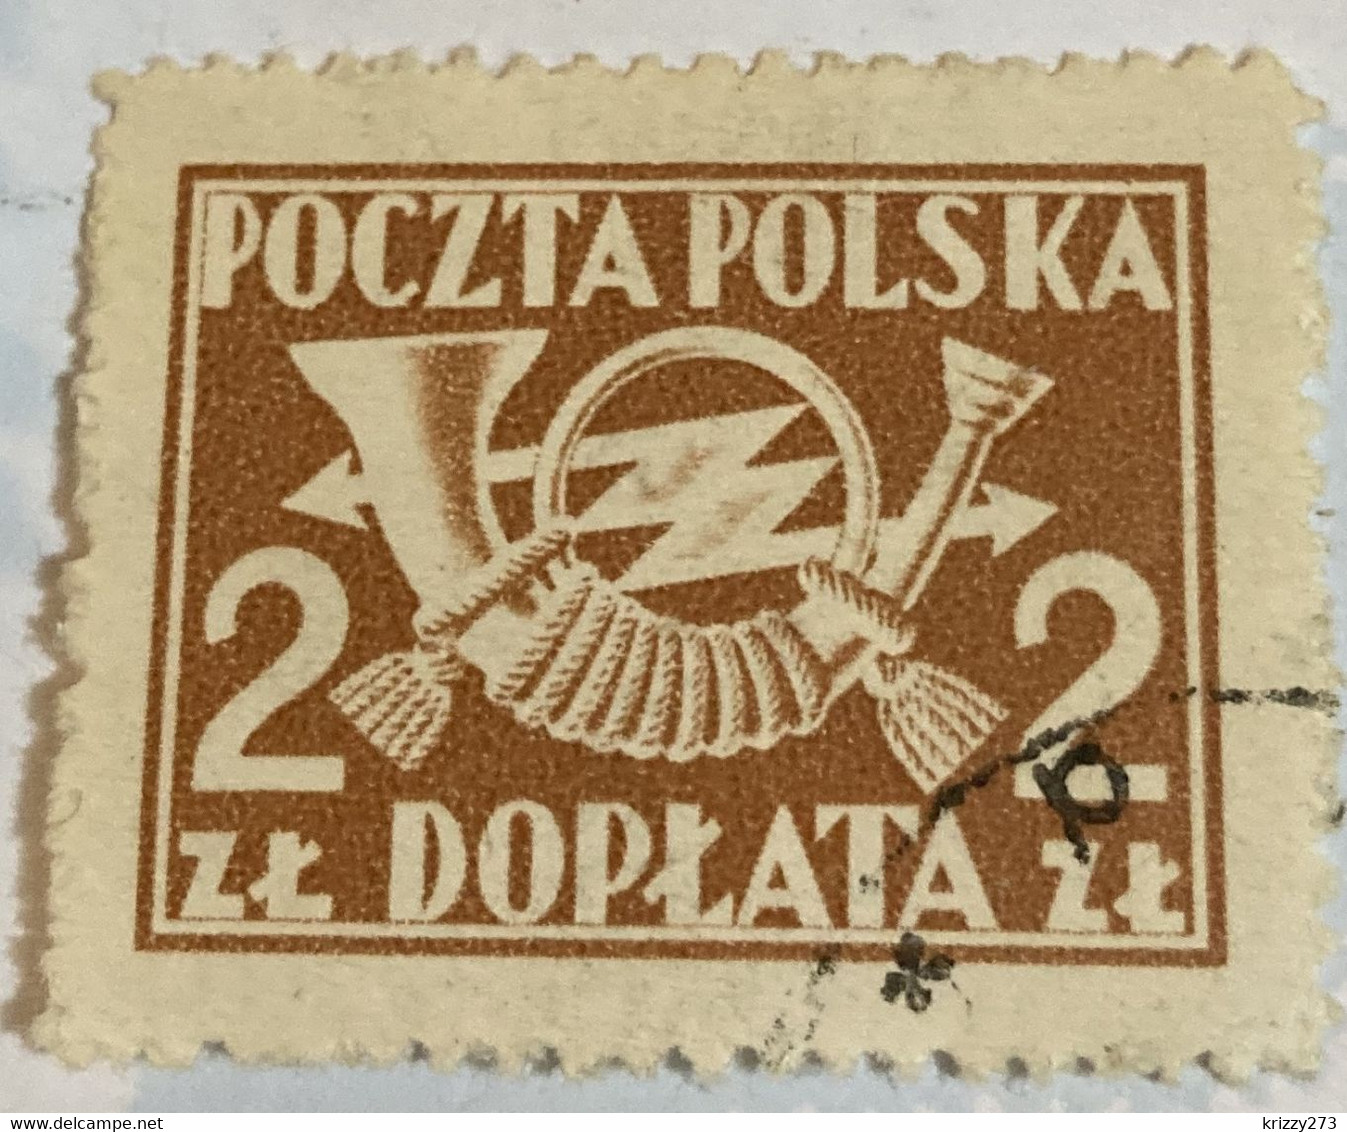 Poland 1945 Post Horn 2zl - Used - Postage Due